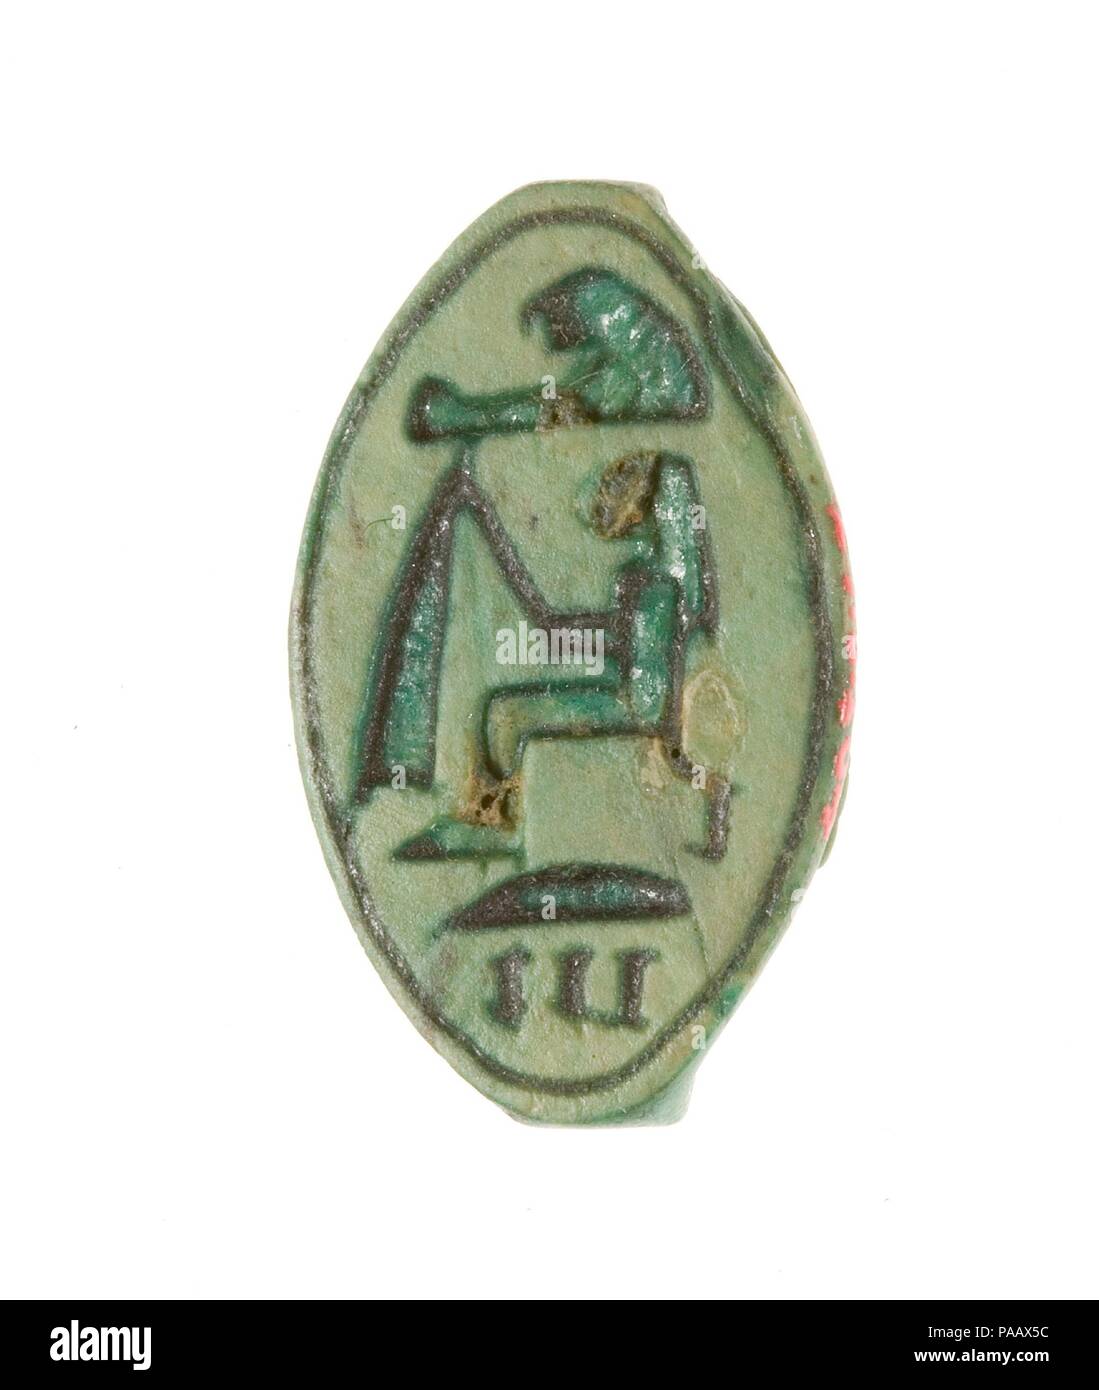 Cowroid Seal Amulet Inscribed with the Name of Hatshepsut. Dimensions: L. 2.2 cm (7/8 in); w. 1.4 cm (9/16 in); h. 0.7 cm (1/4 in). Dynasty: Dynasty 18. Reign: Joint reign of Hatshepsut and Thutmose III. Date: ca. 1479-1458 B.C..  This cowrie-shaped amulet is inscribed with Hatshepsut's personal name which literally means 'foremost of noblewomen' (hat-shepsut). The back of the amulet is decorated with the image of a falcon with its wings outstretched and wearing an atef-crown. Museum: Metropolitan Museum of Art, New York, USA. Stock Photo